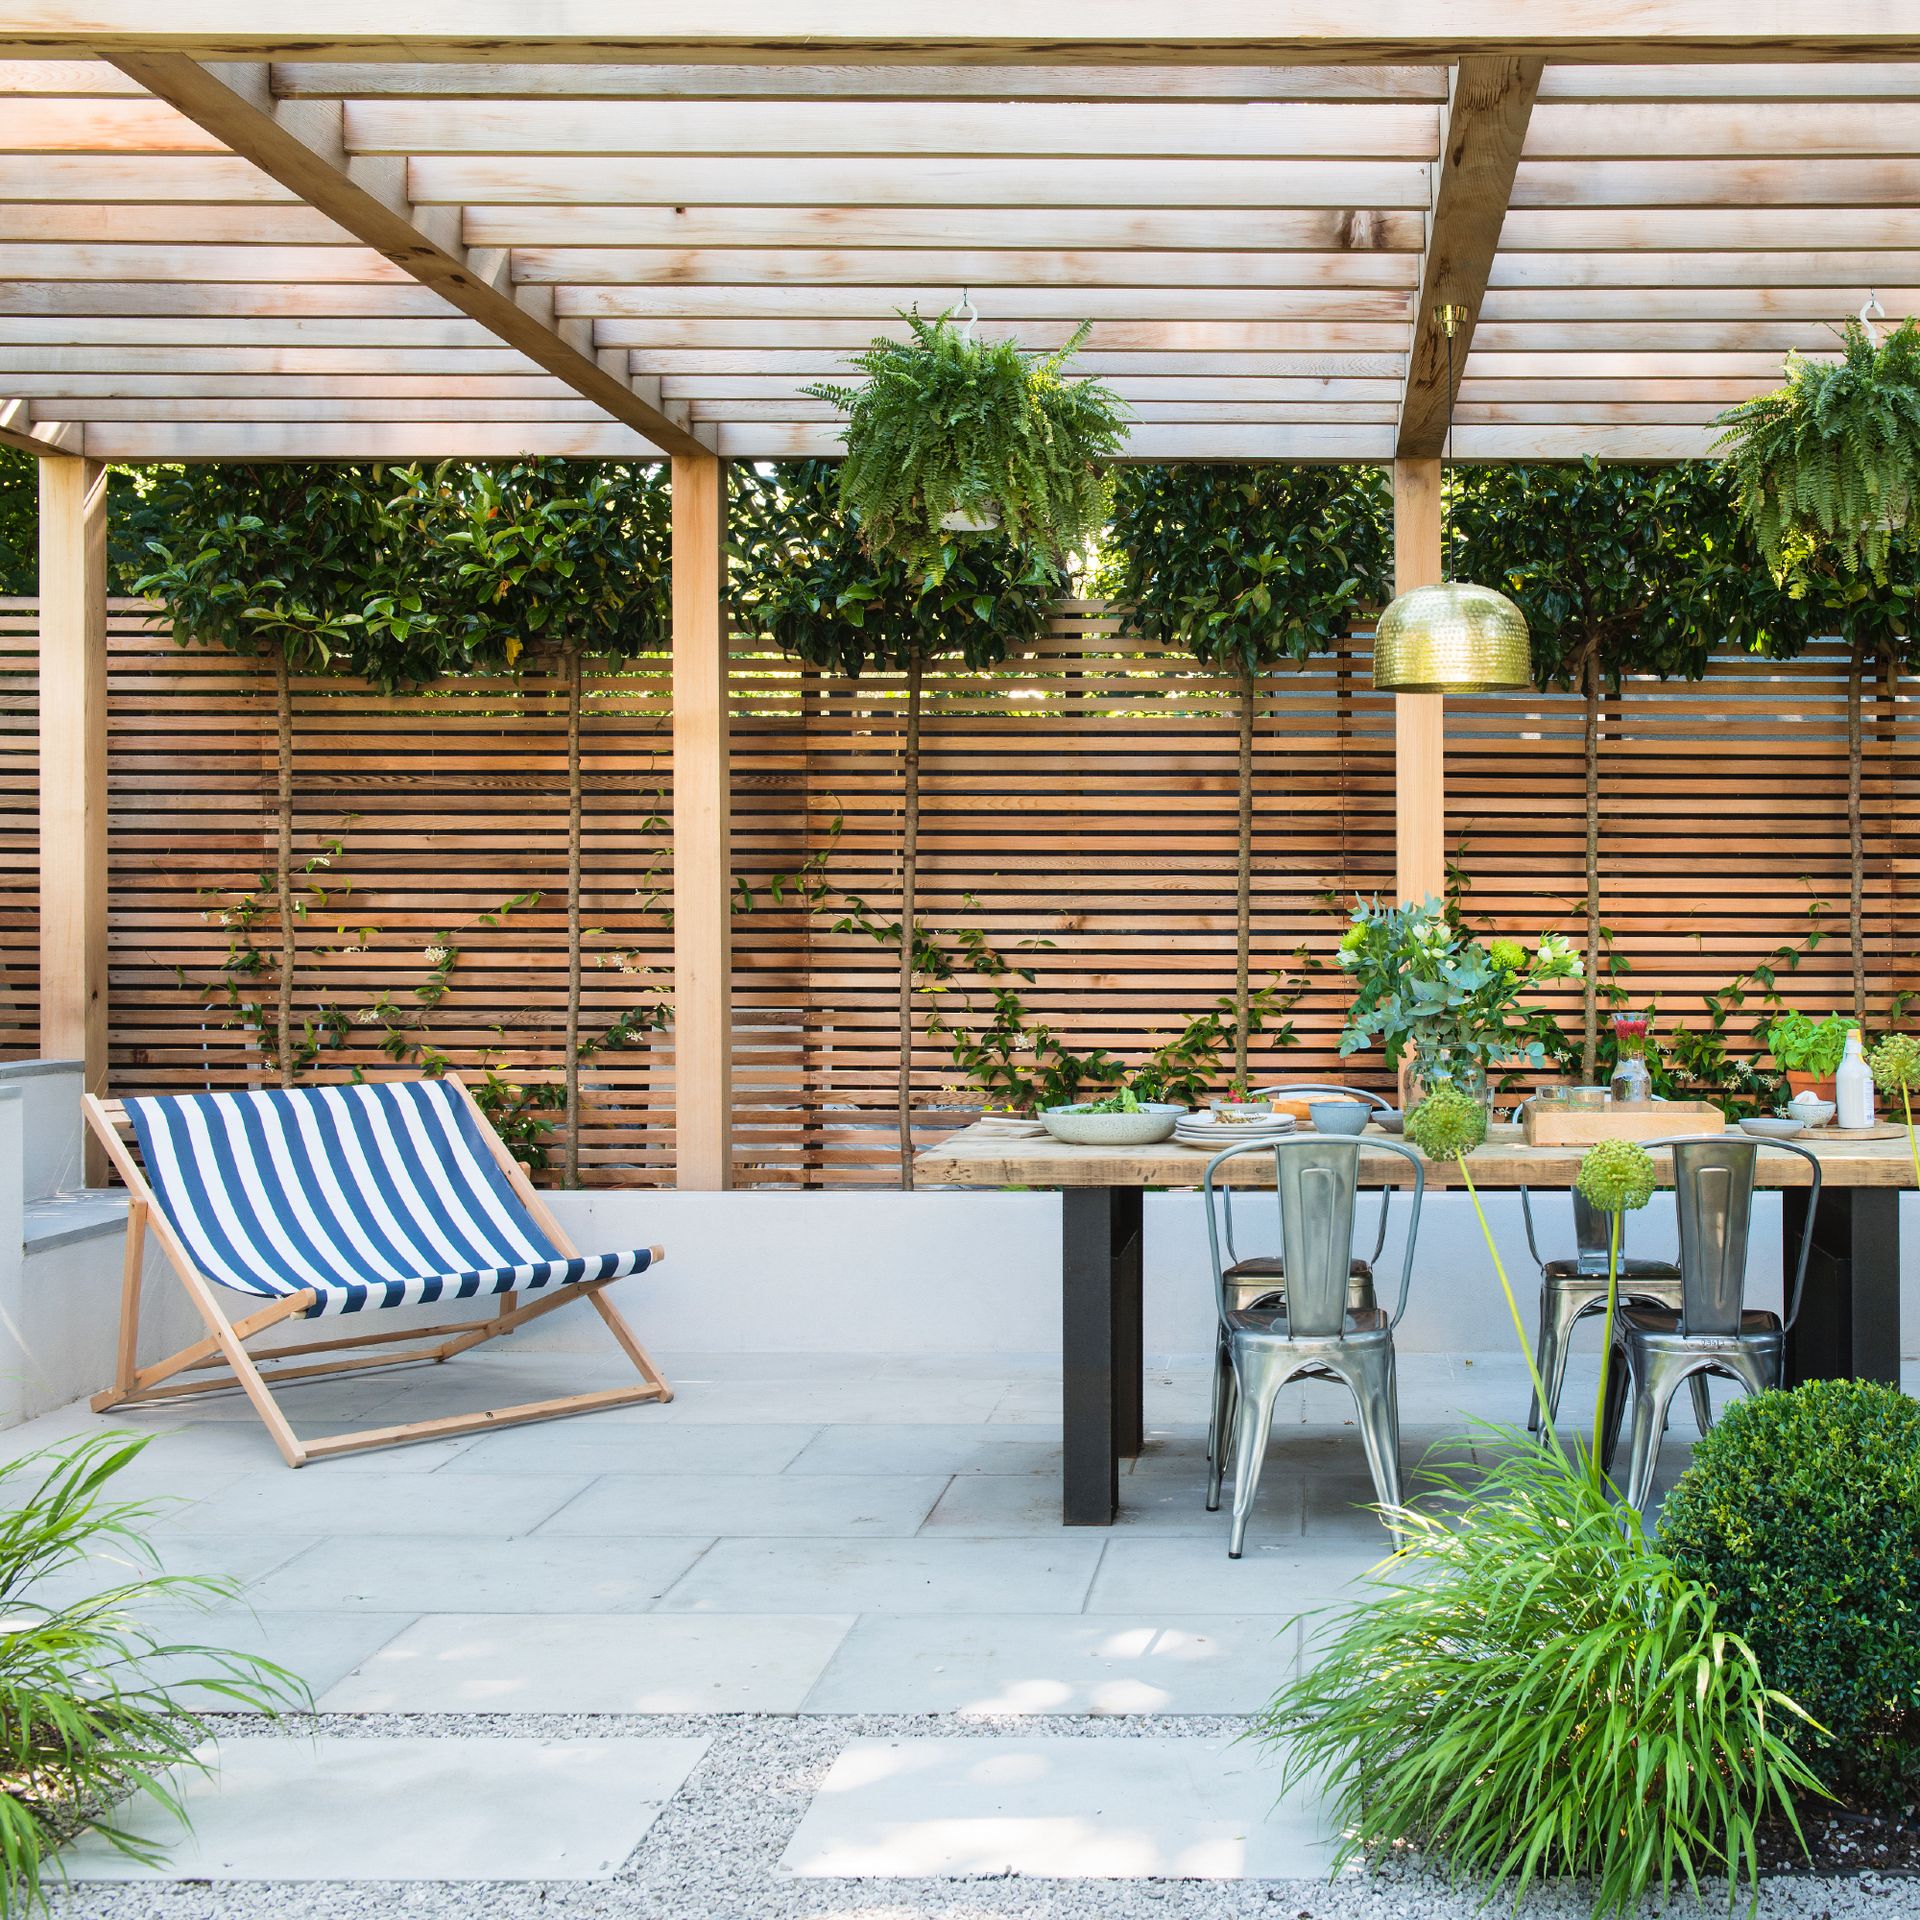 Patio cover ideas - 25 ways to keep your space sheltered | Ideal Home